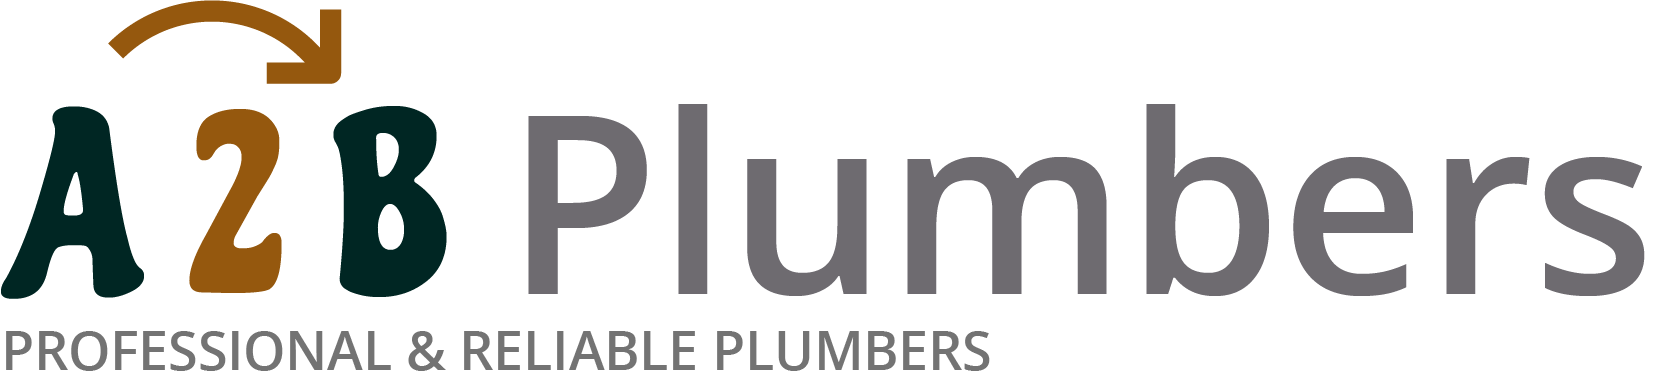 If you need a boiler installed, a radiator repaired or a leaking tap fixed, call us now - we provide services for properties in Downham and the local area.